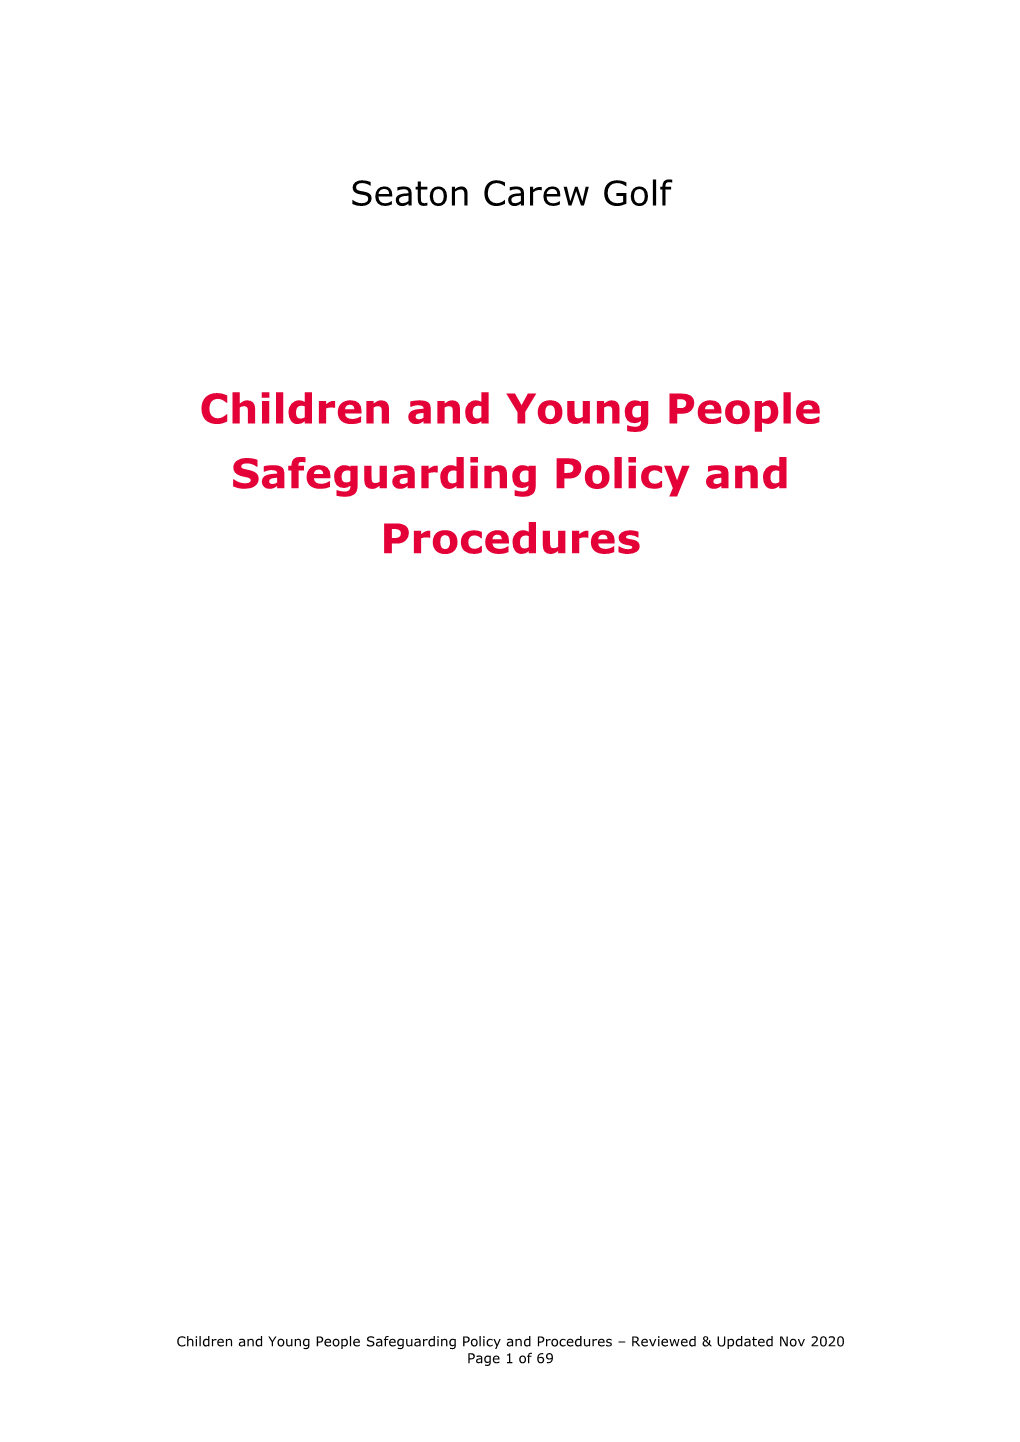 Children and Young People Safeguarding Policy and Procedures